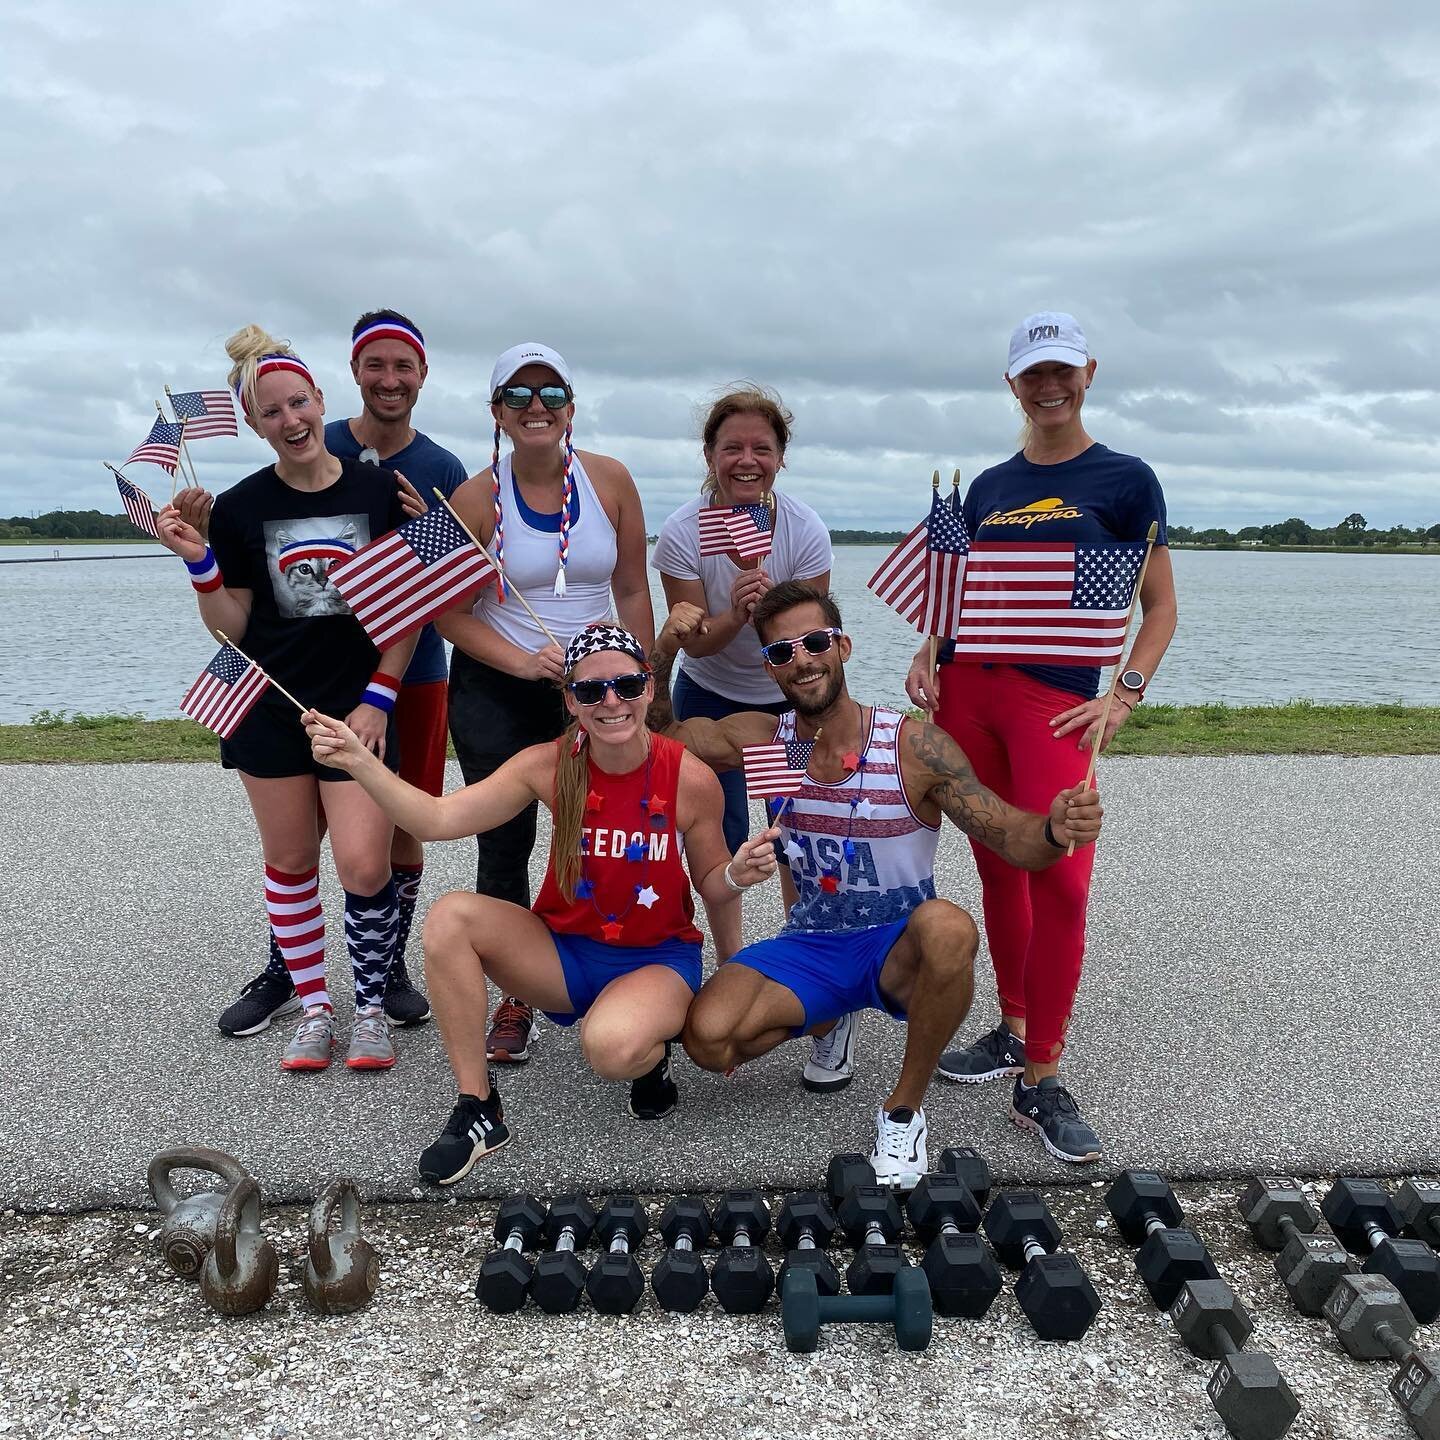 Memorial Day Workout 2020!!! 🇺🇸 In order to show our appreciation to all the service men &amp; women the FitFam put in some serious work!!! ❤️☁️💙🇺🇸 #memorialdayweekend  #sunshine #workoutmotivation #fitness #holidayweekend🇺🇸 #kettlebellworkout